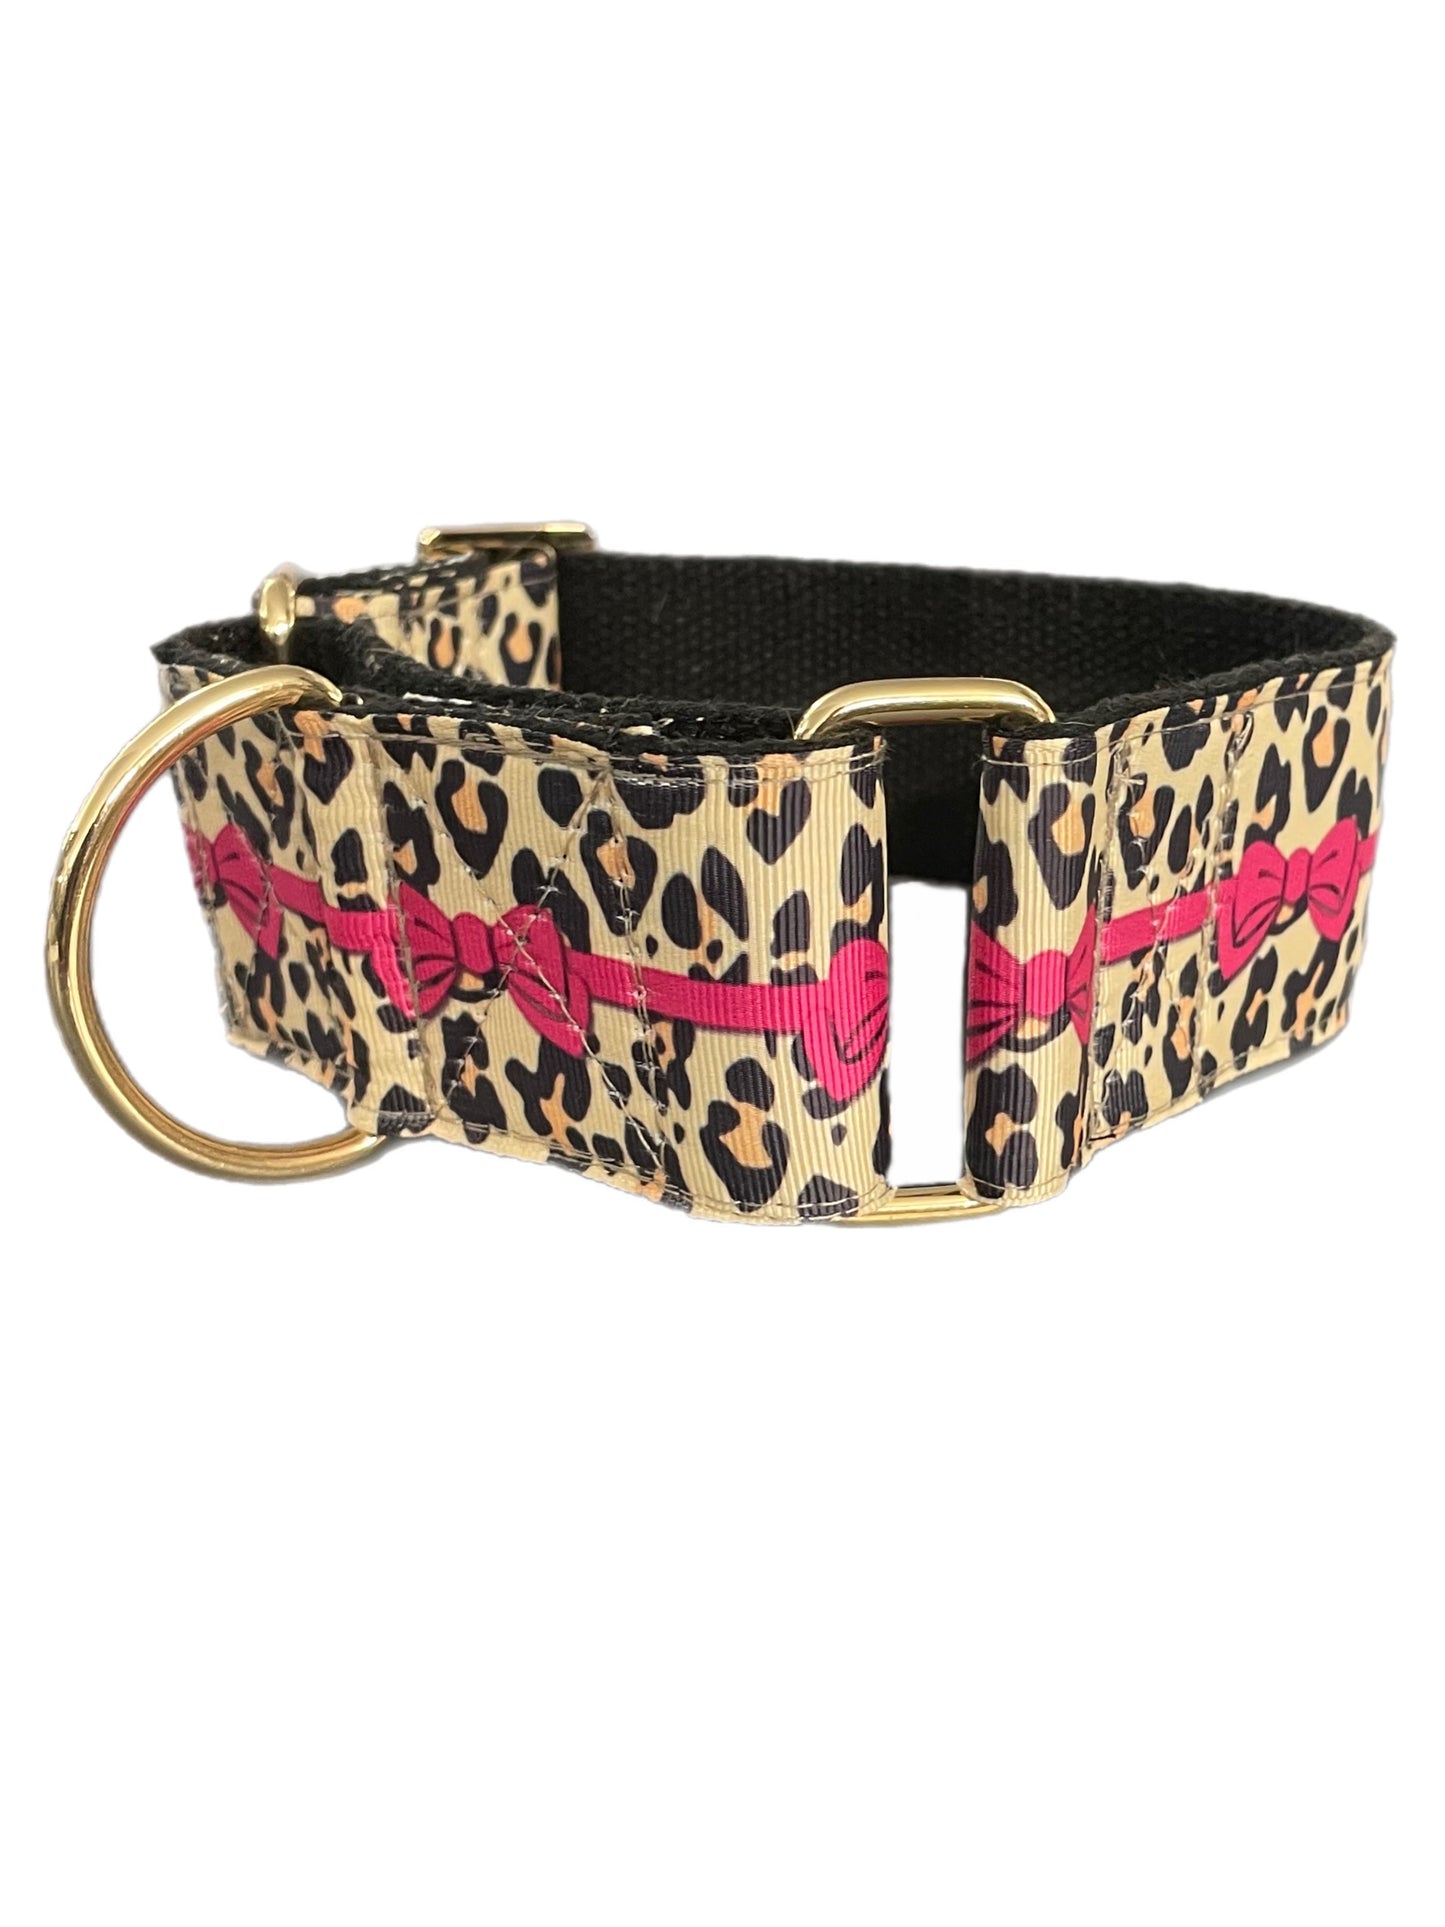 Leopard and pink bow grosgrain ribbon sewn on black cotton webbing Martingale collar greyhound 5cms width on sale